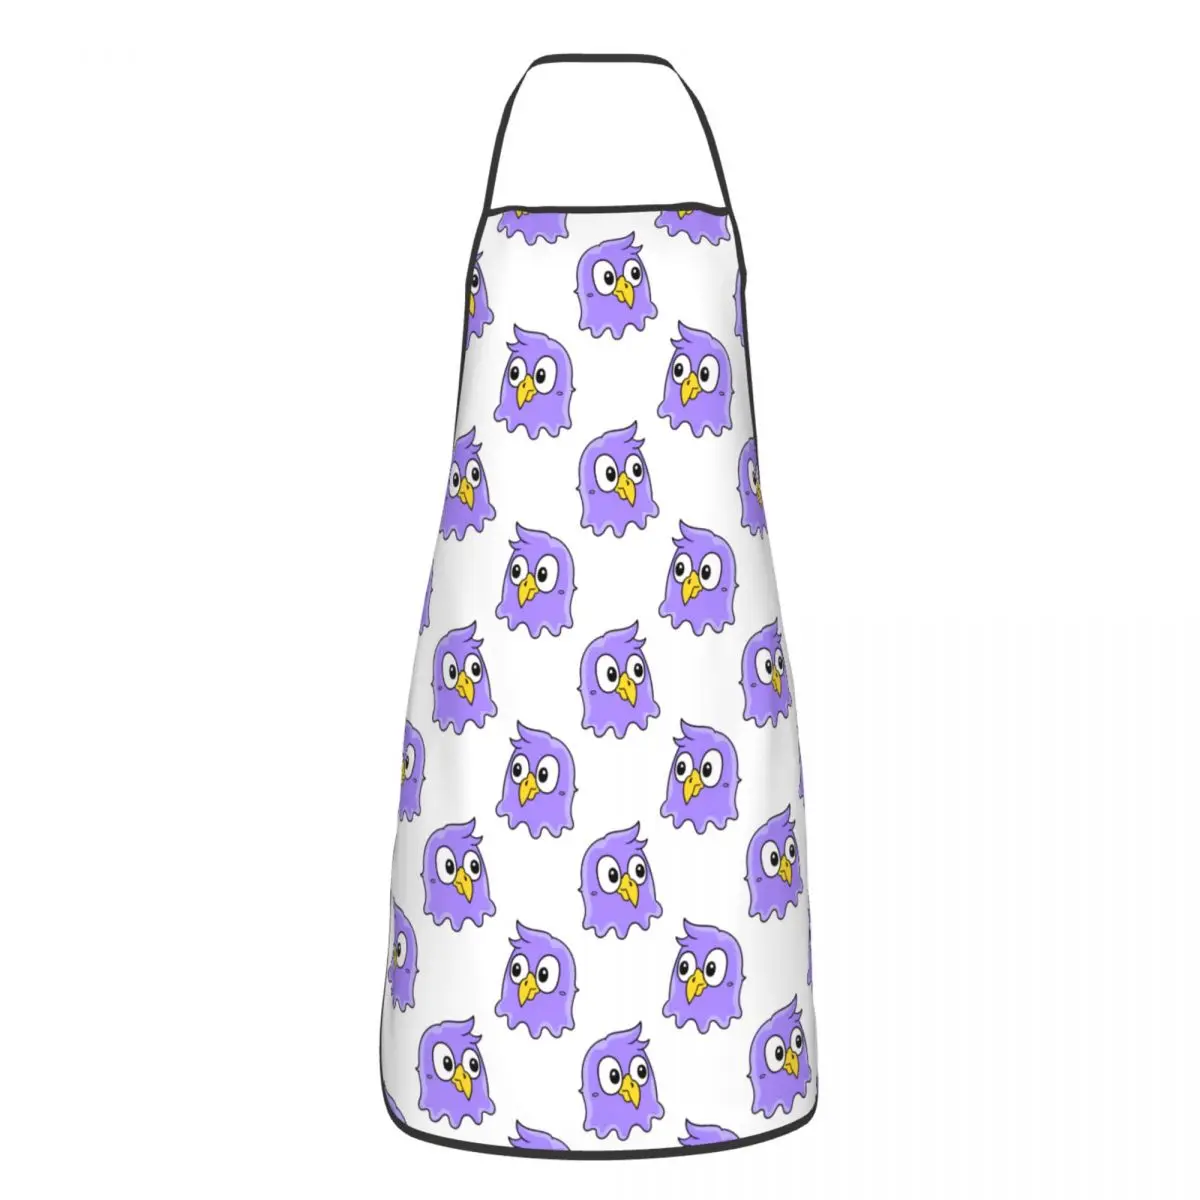 

Cute White Bird Eagle Apron Cuisine Cooking Baking Household Cleaning Gardening Anime Bibs Kitchen Funny Tablier Chef